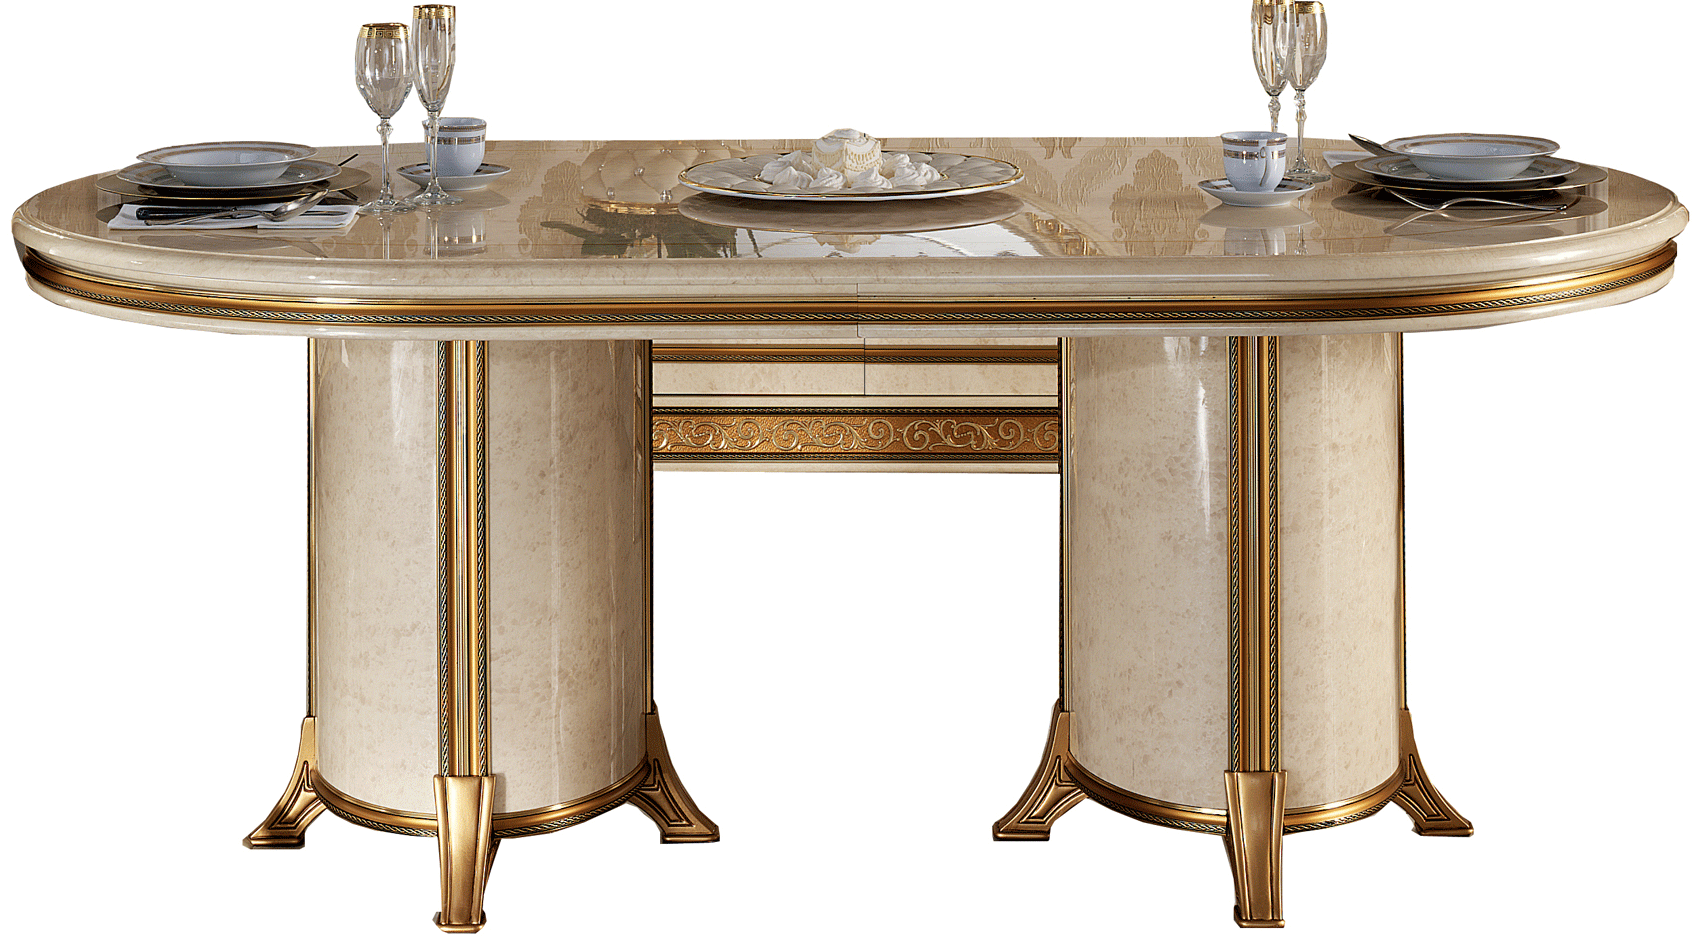 Dining Room Furniture Marble-Look Tables Melodia Dining Table